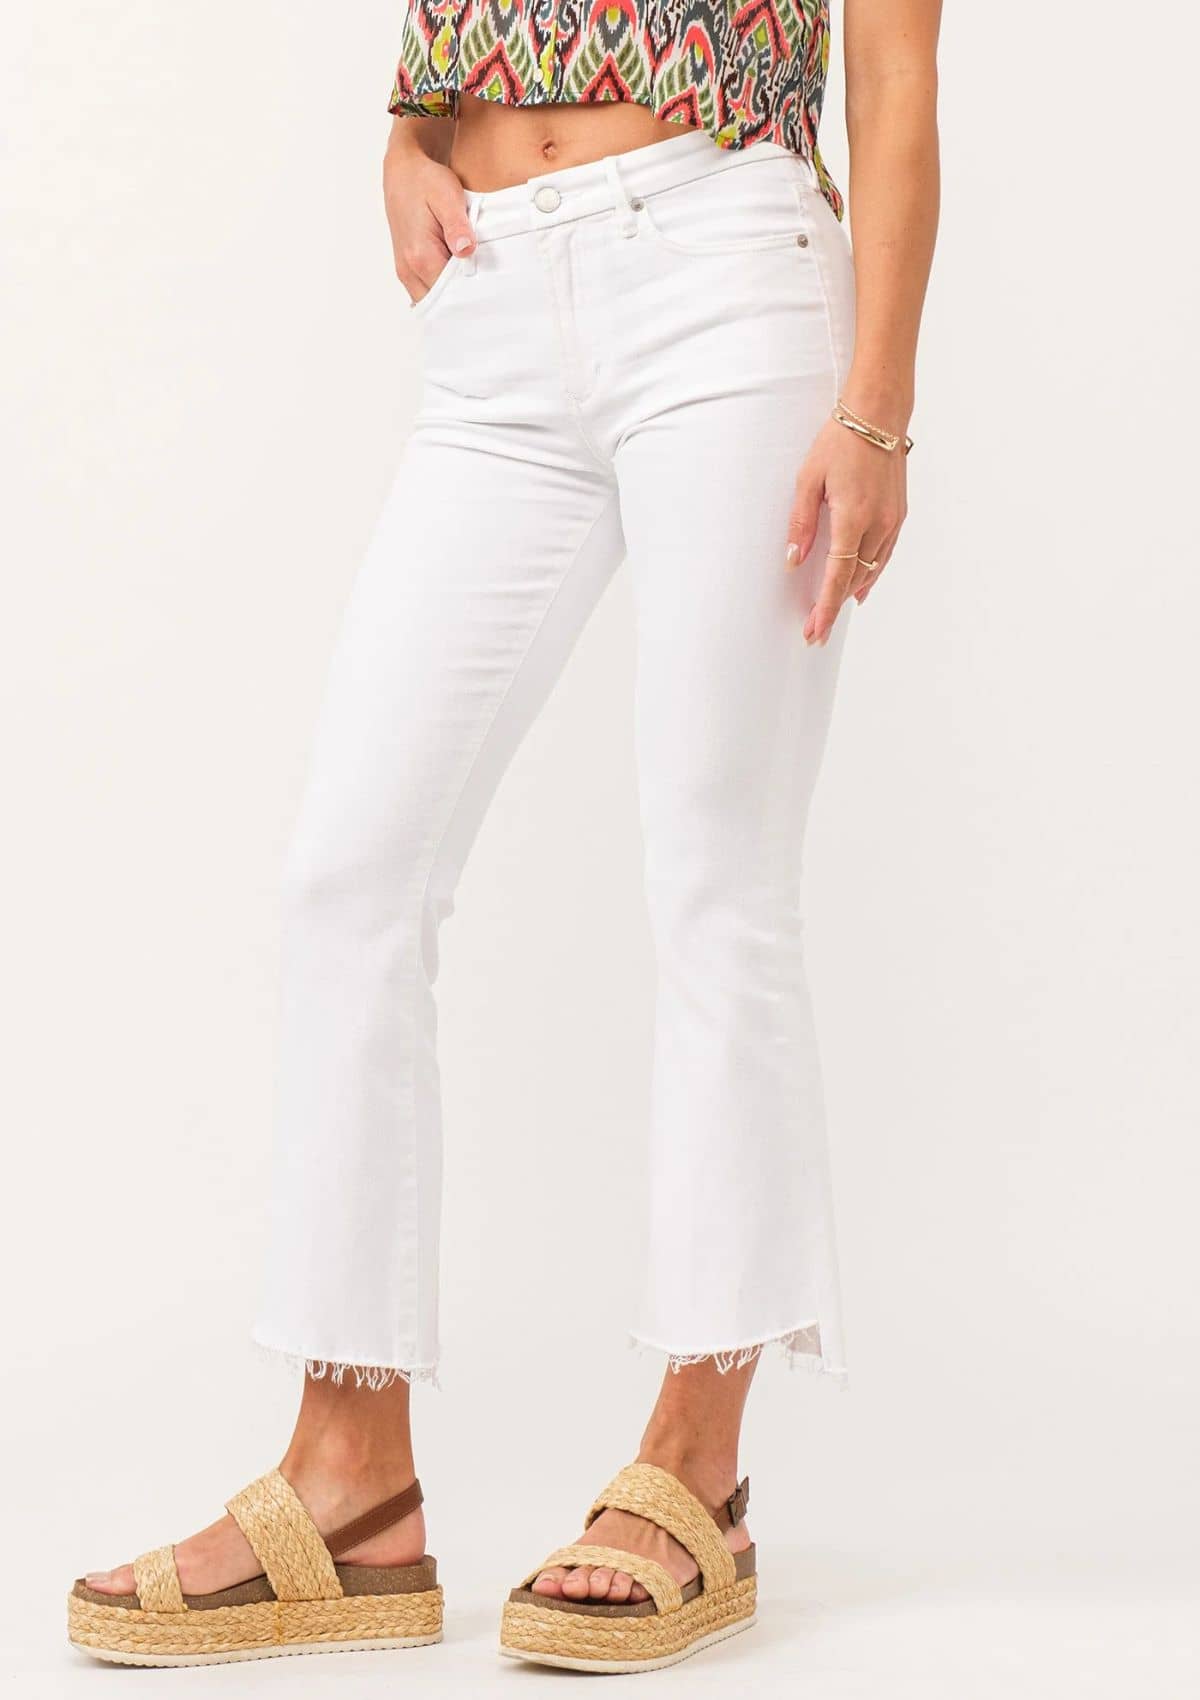 Mid rise jeans frayed hems.